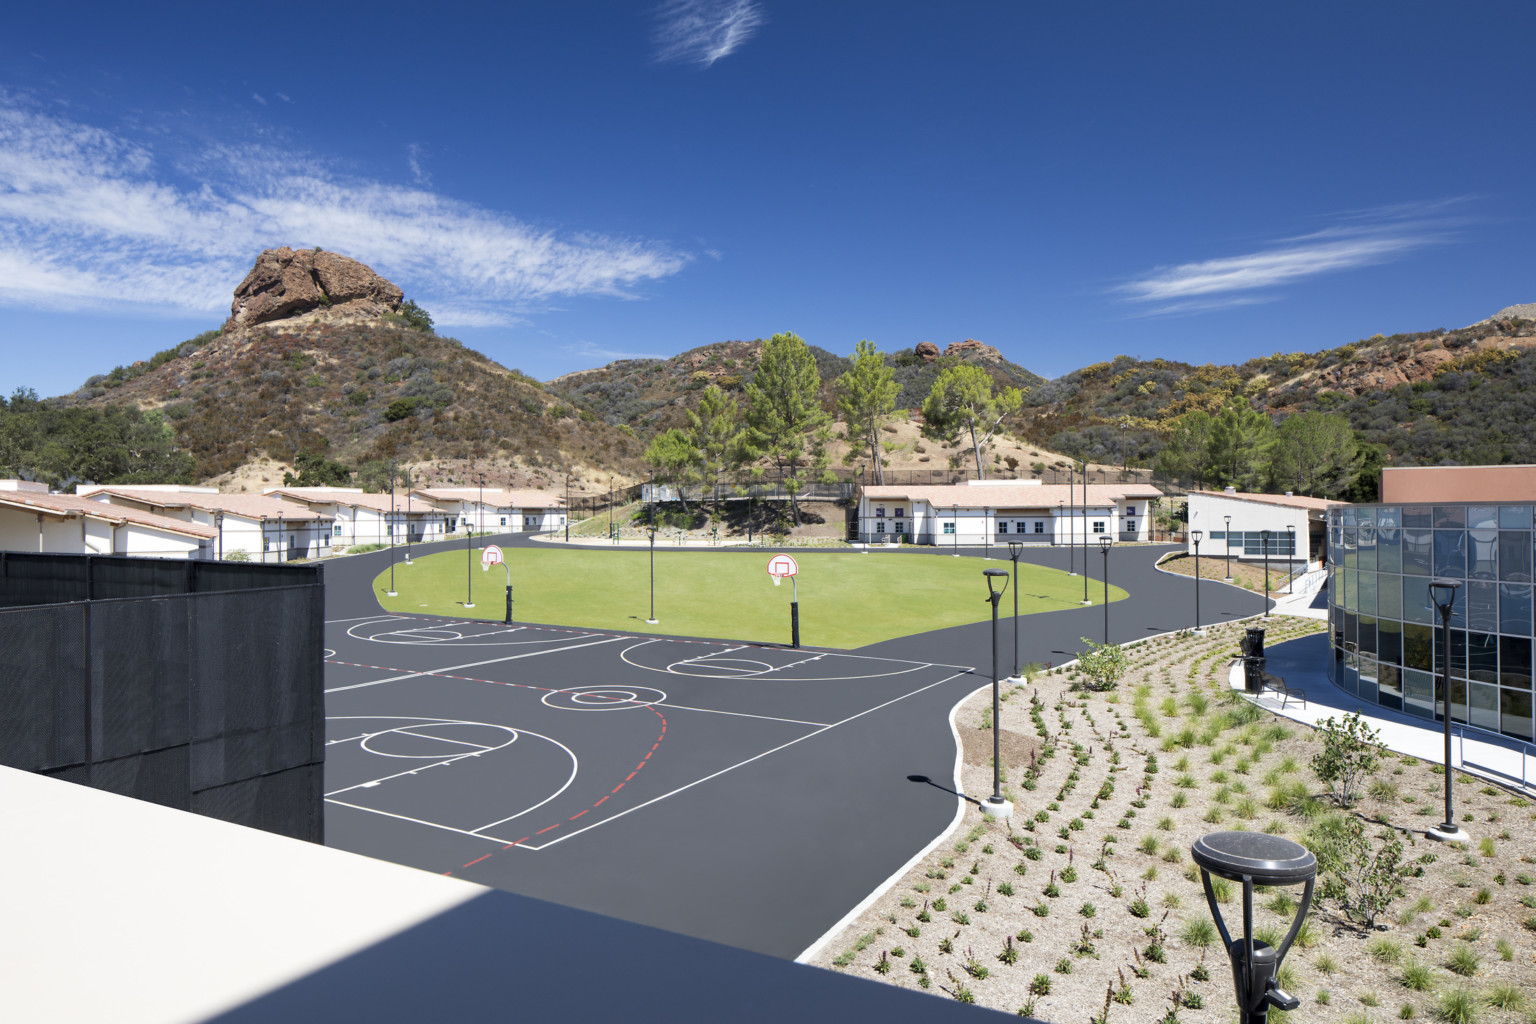 Rendering of a courtyard with basketball courts and a grassy area. Buildings along the back and right side. Hills beyond